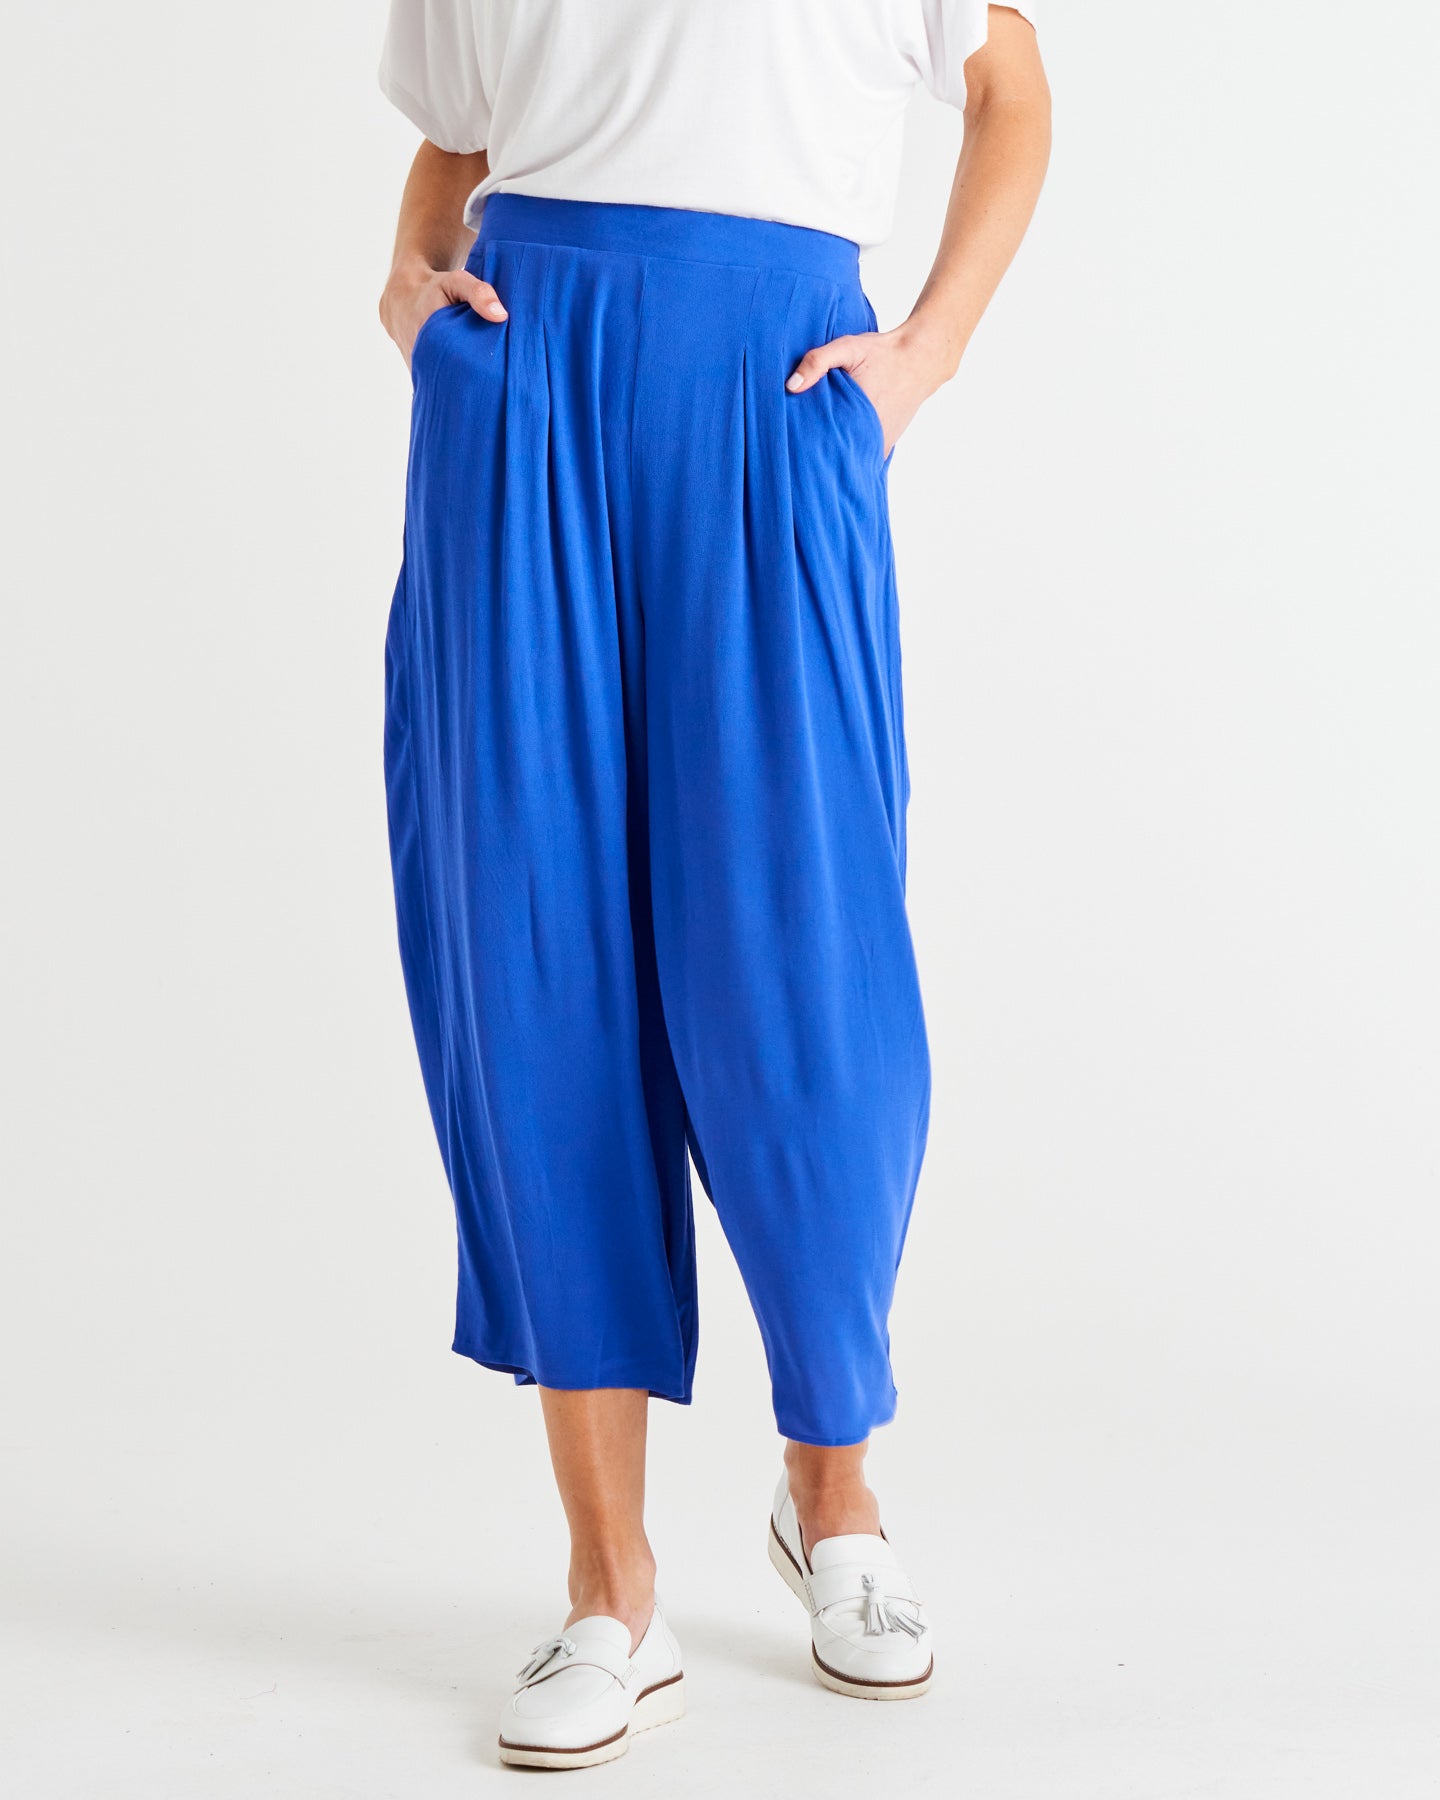 Olympia Pant - Deco Blue